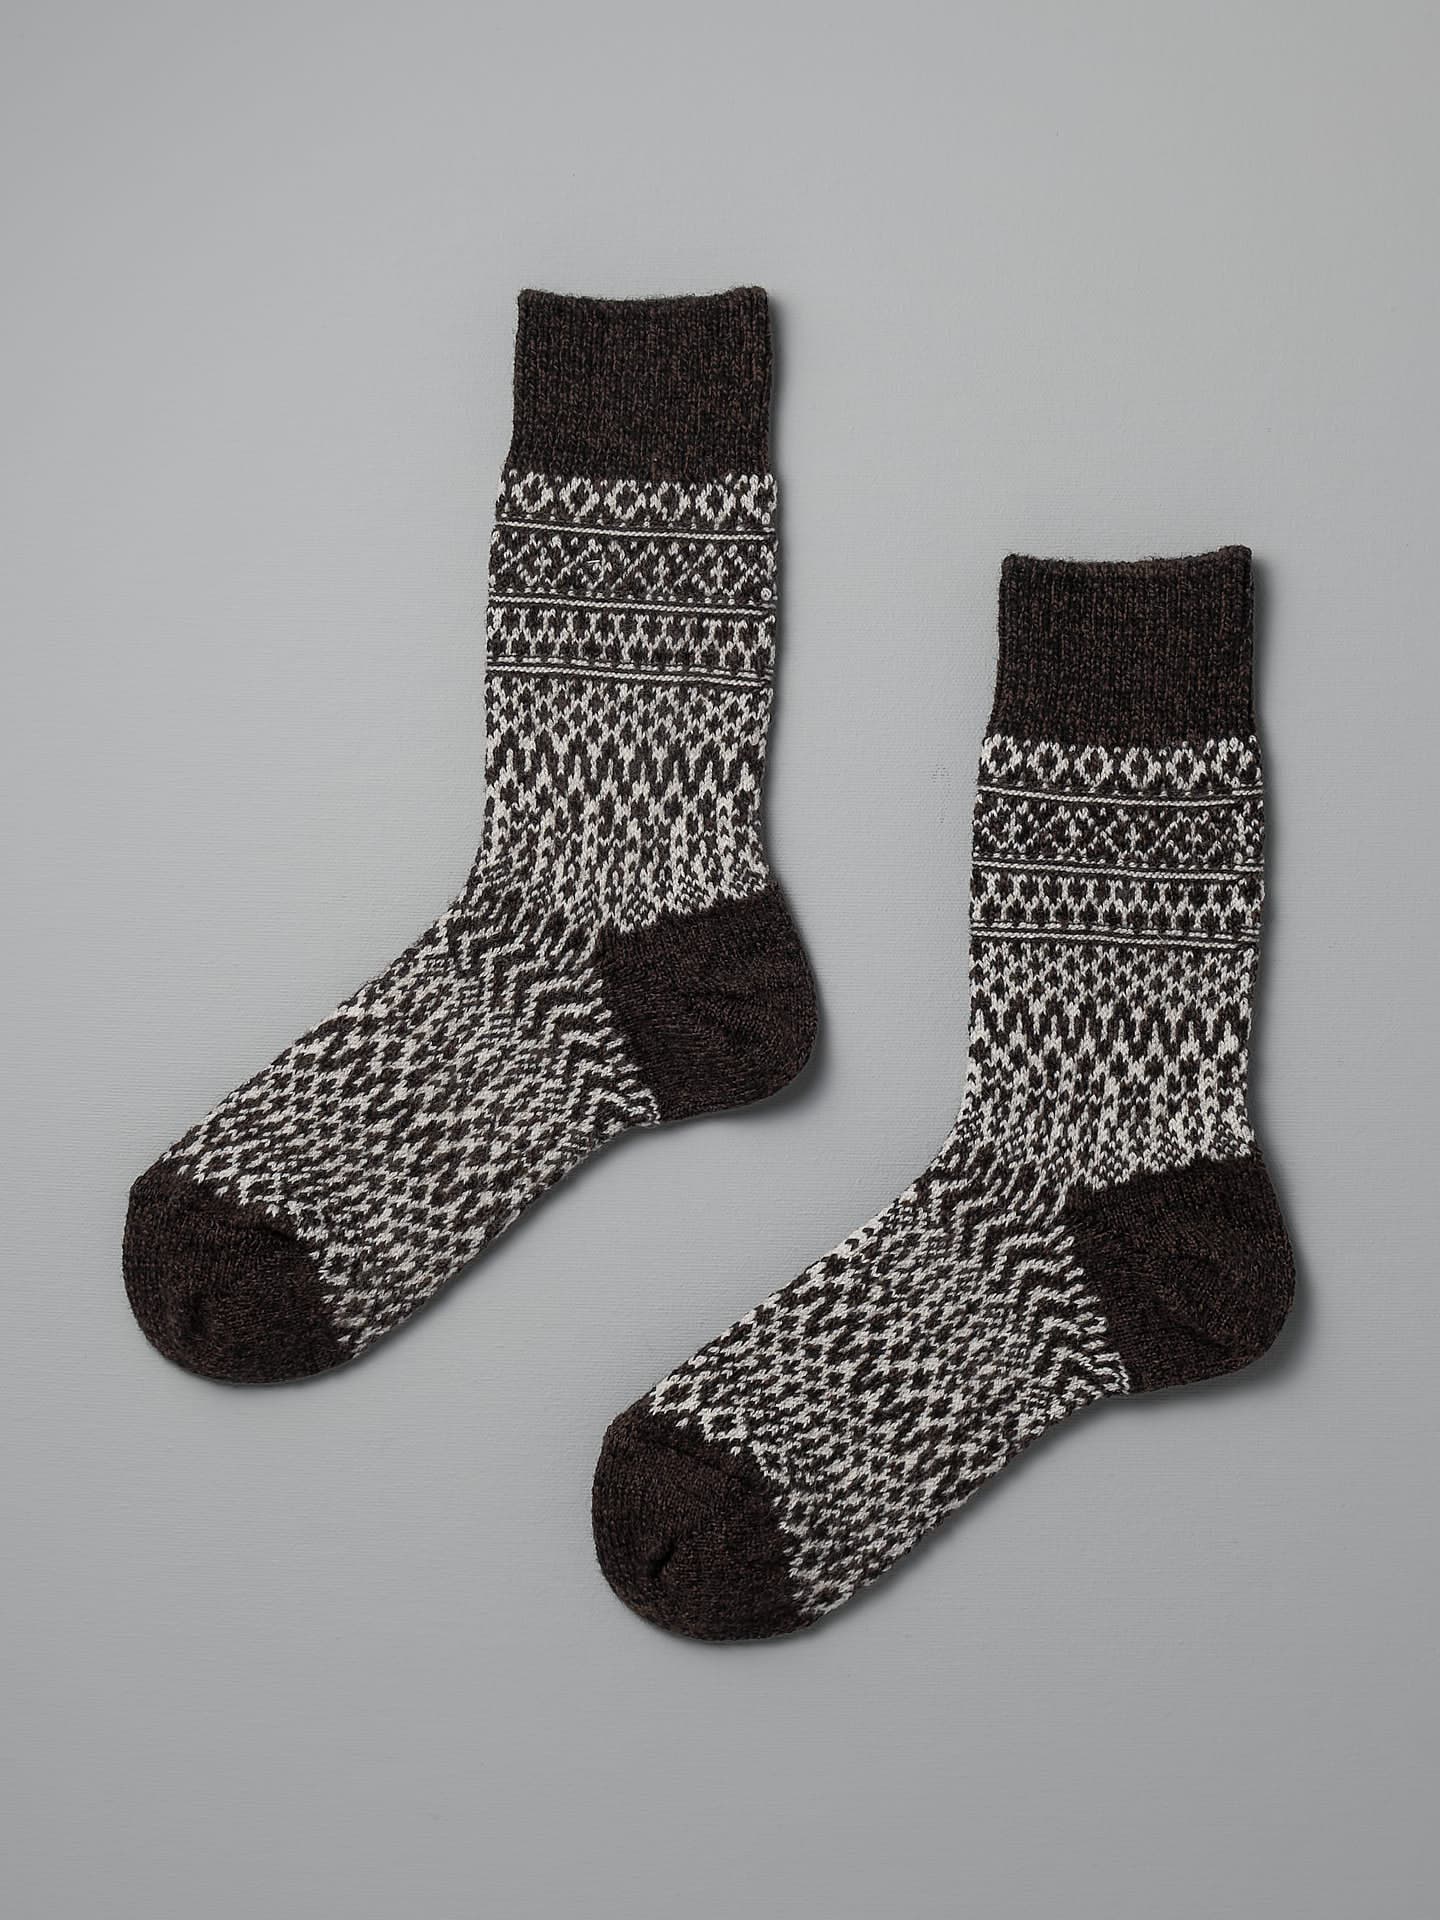 A pair of Oslo Wool Jacquard Socks – Coffee by Nishiguchi Kutsushita with geometric patterns, laying flat on a gray background. Check the size chart for EUR, UK, US conversion to ensure they fit perfectly.